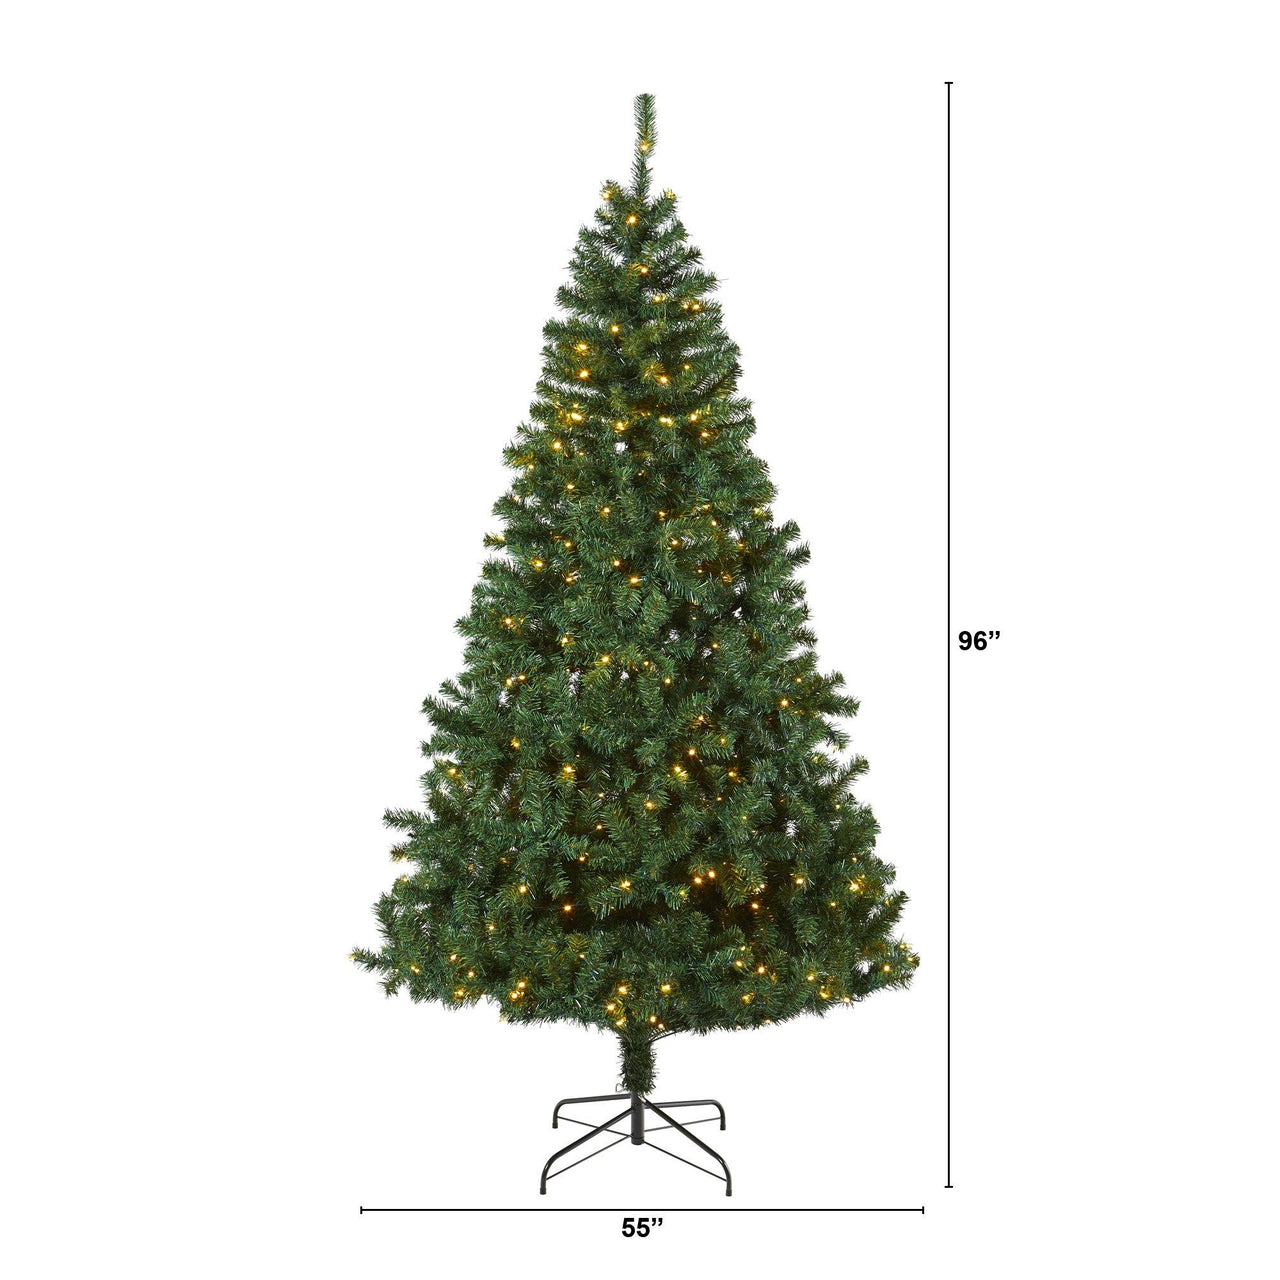 8' Northern Tip Artificial Christmas Tree with 450 Clear LED Lights - The Fox Decor